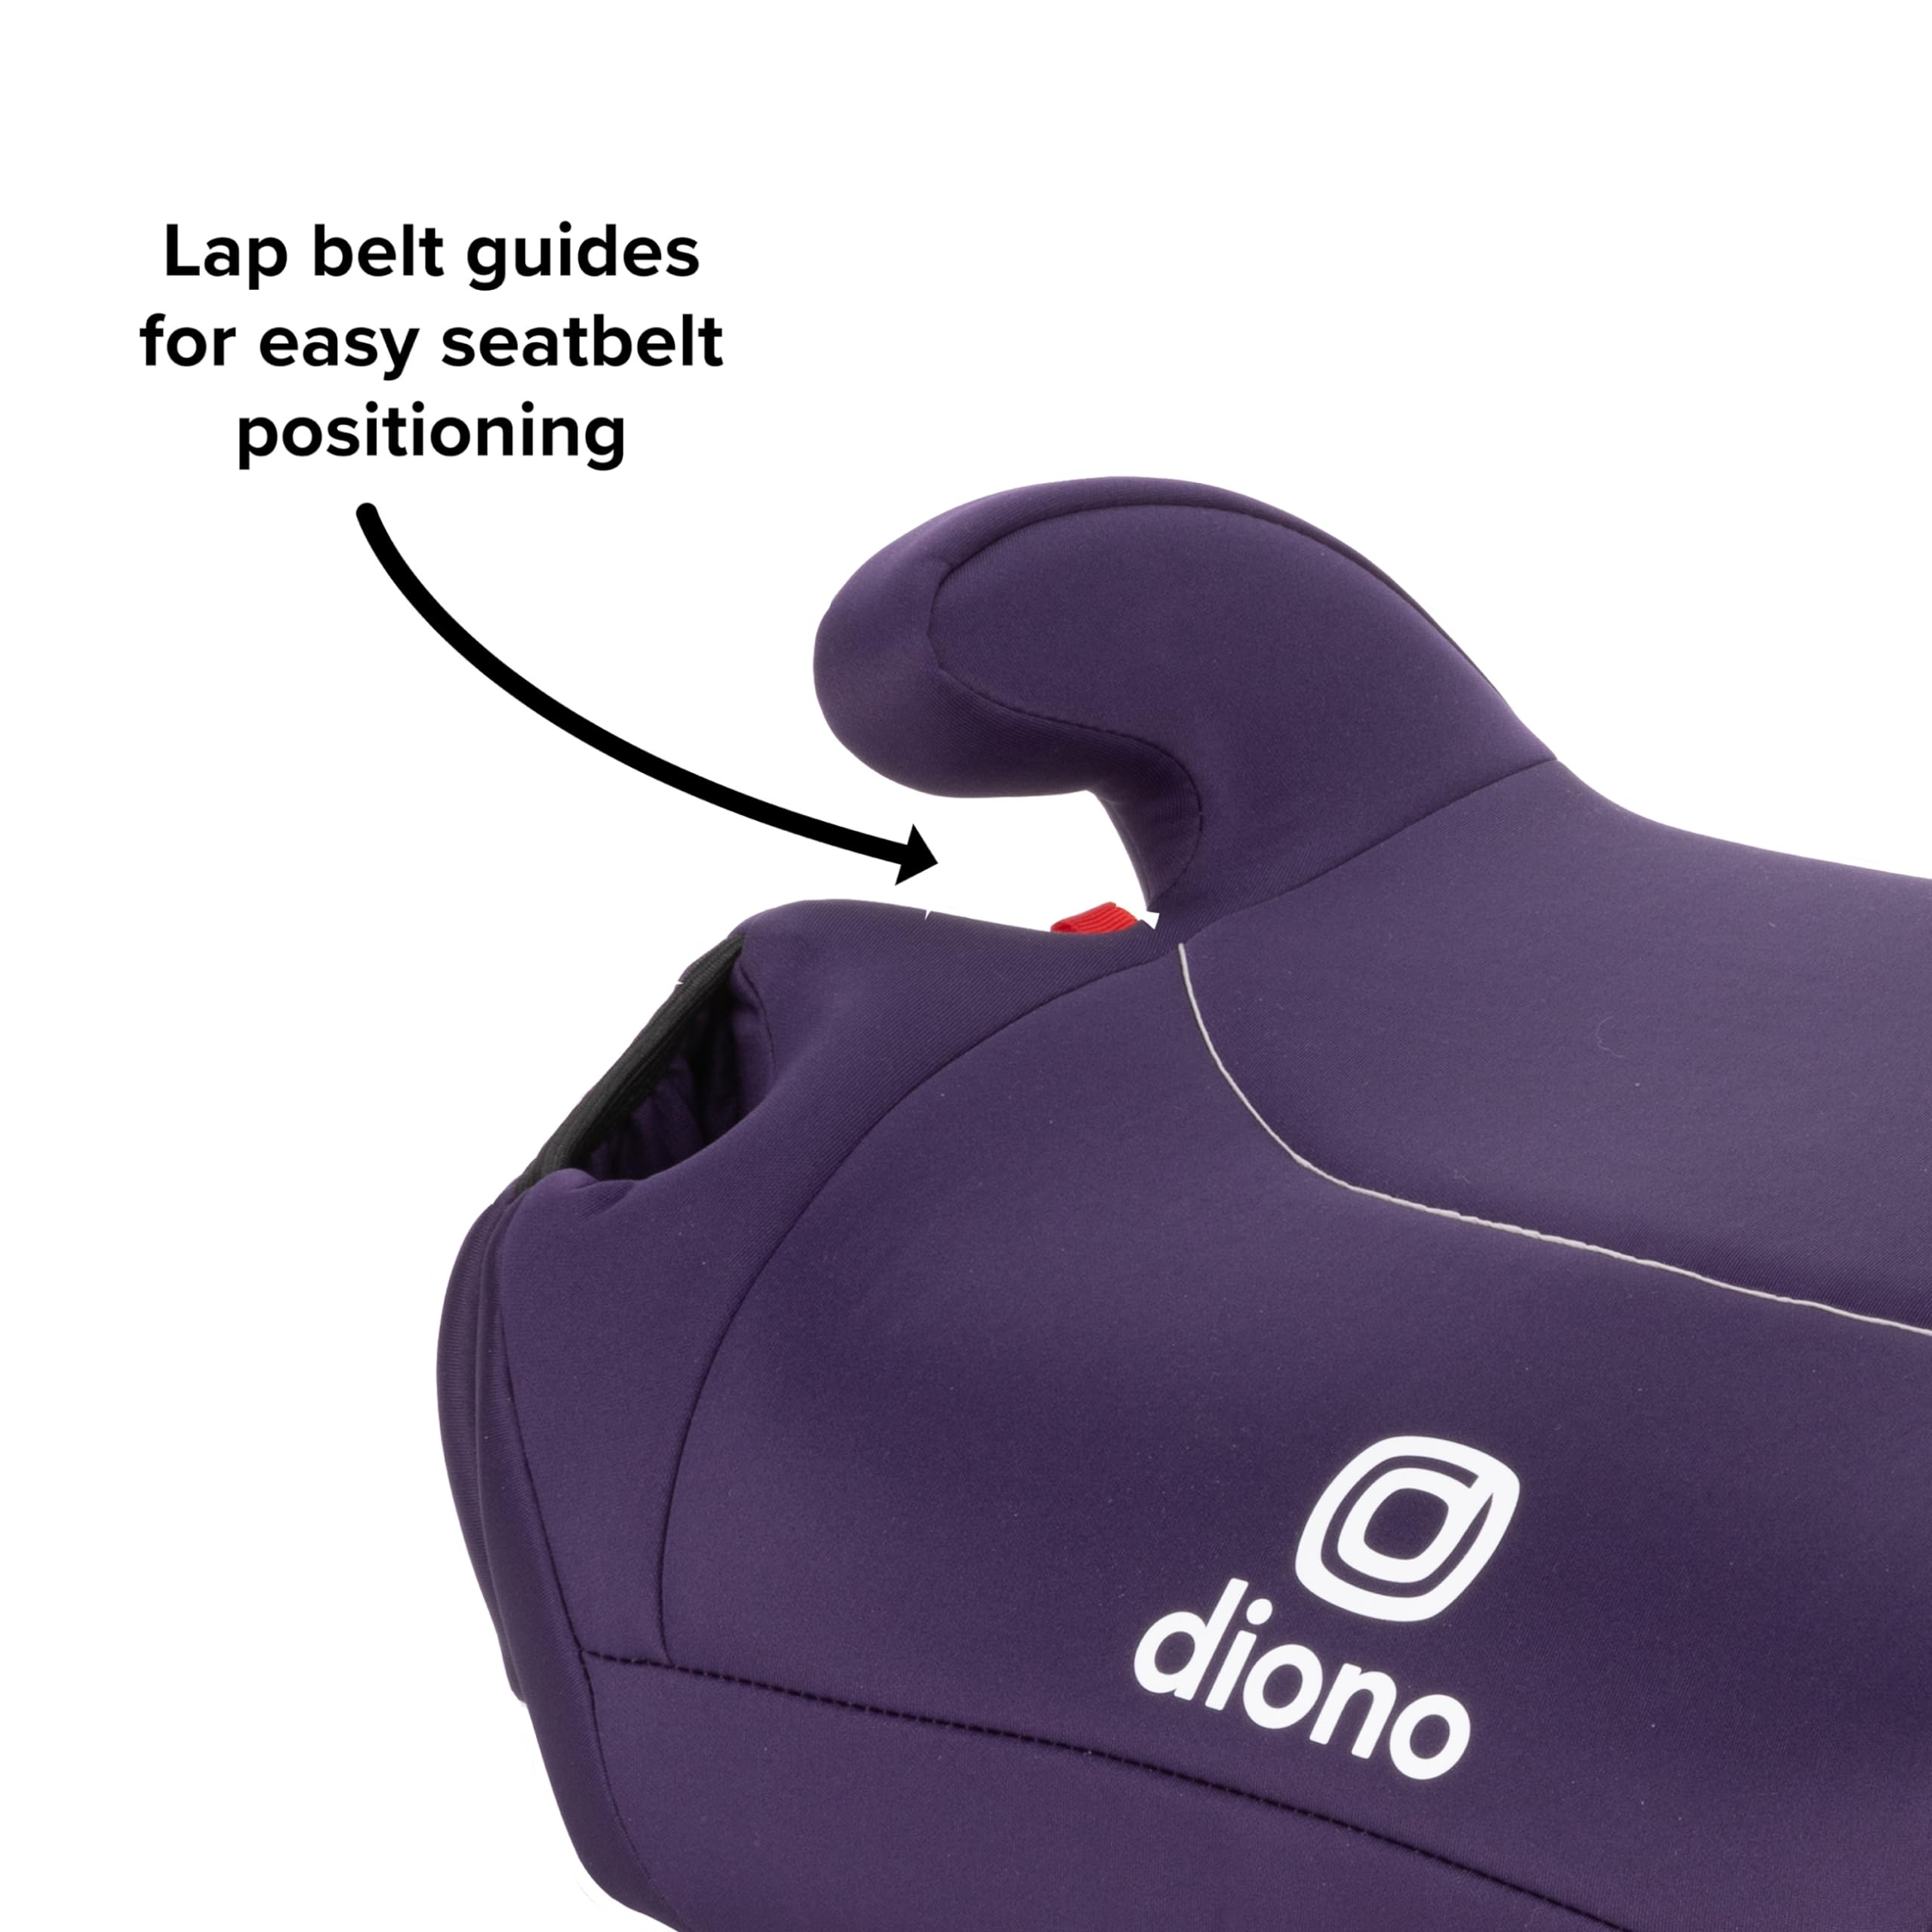 Diono Solana, No Latch, Pack of 2 Backless Booster Car Seats, Lightweight, Machine Washable Covers, Cup Holders, Purple Wildberry